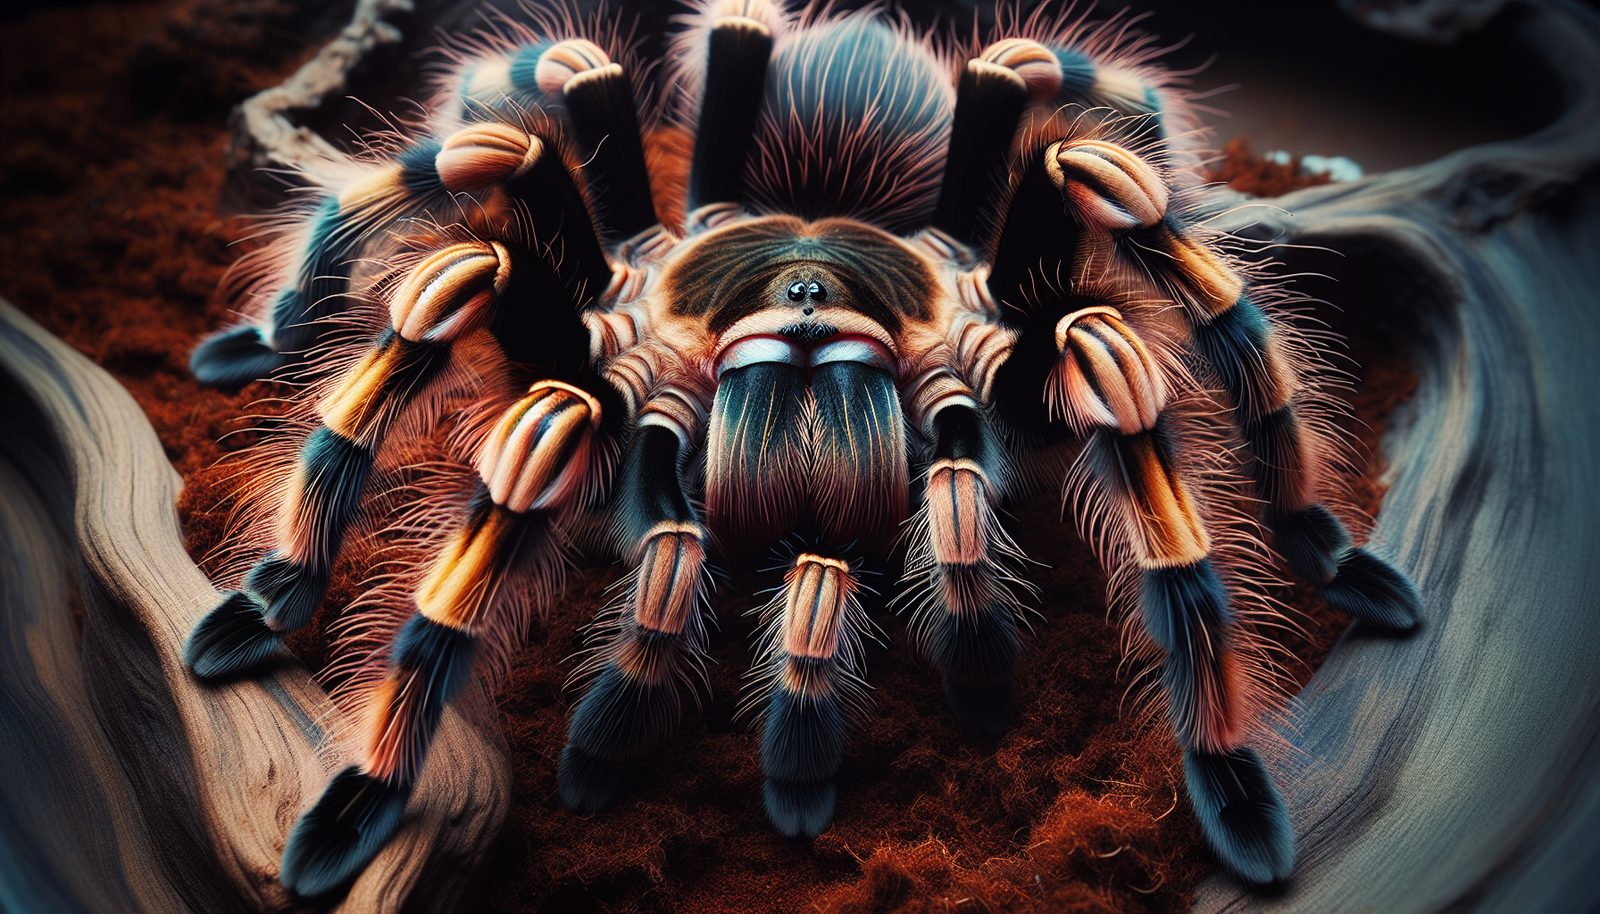 How Do You Care For The Delicate And Colorful King Baboon Tarantula?